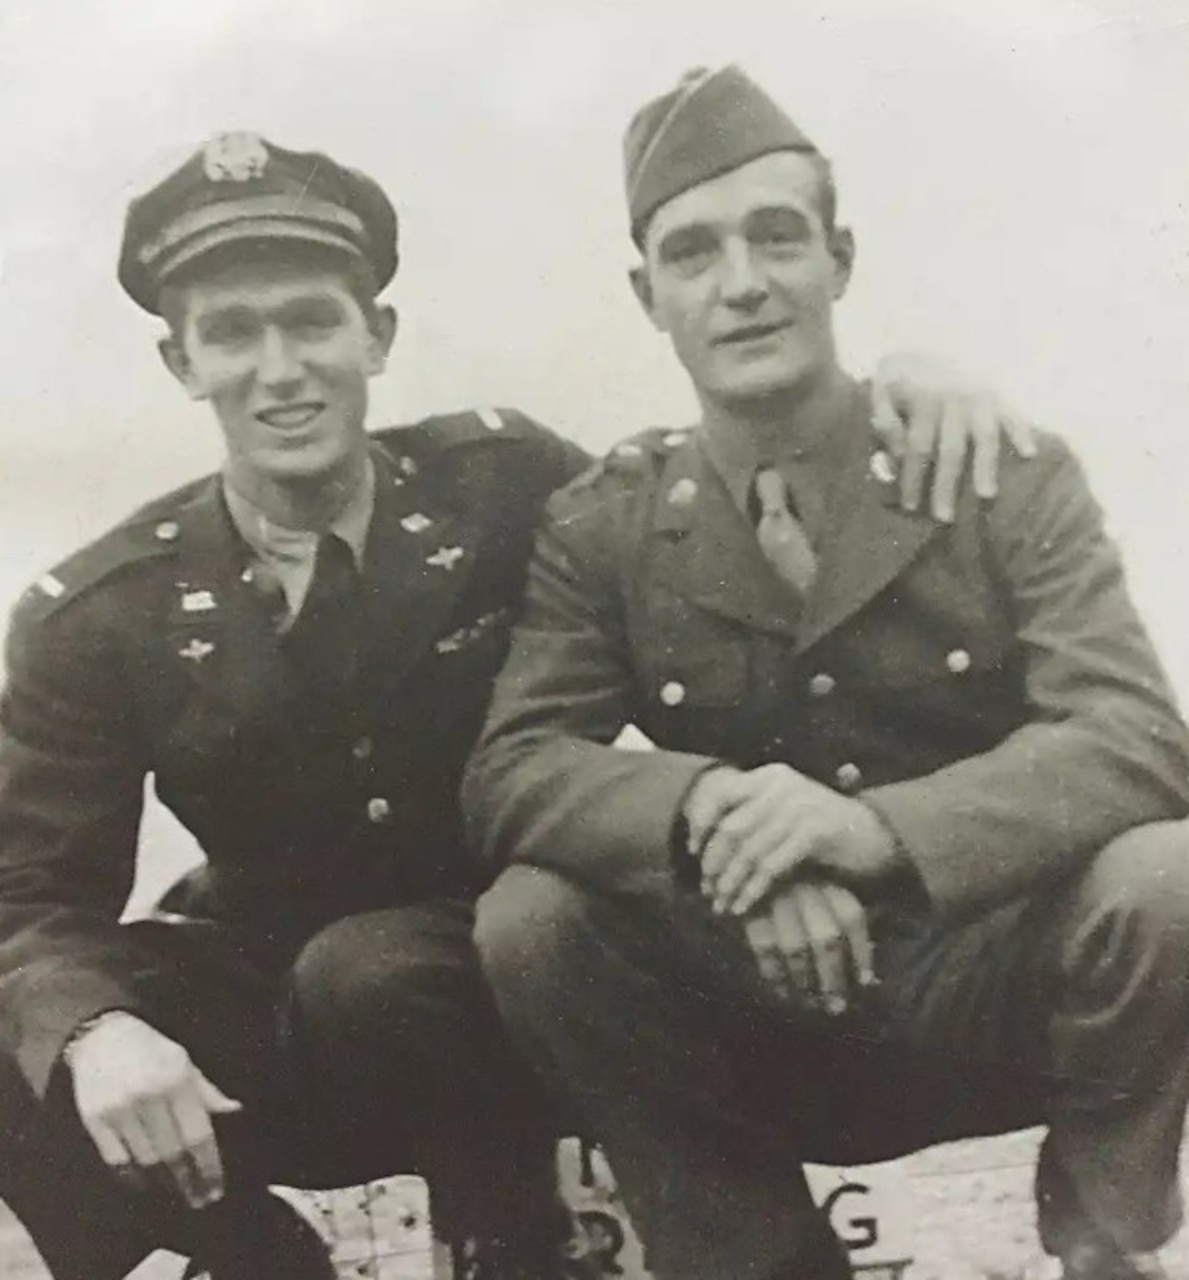 Two men squat down beside each other for a photo. One has his hand on the other’s shoulder.